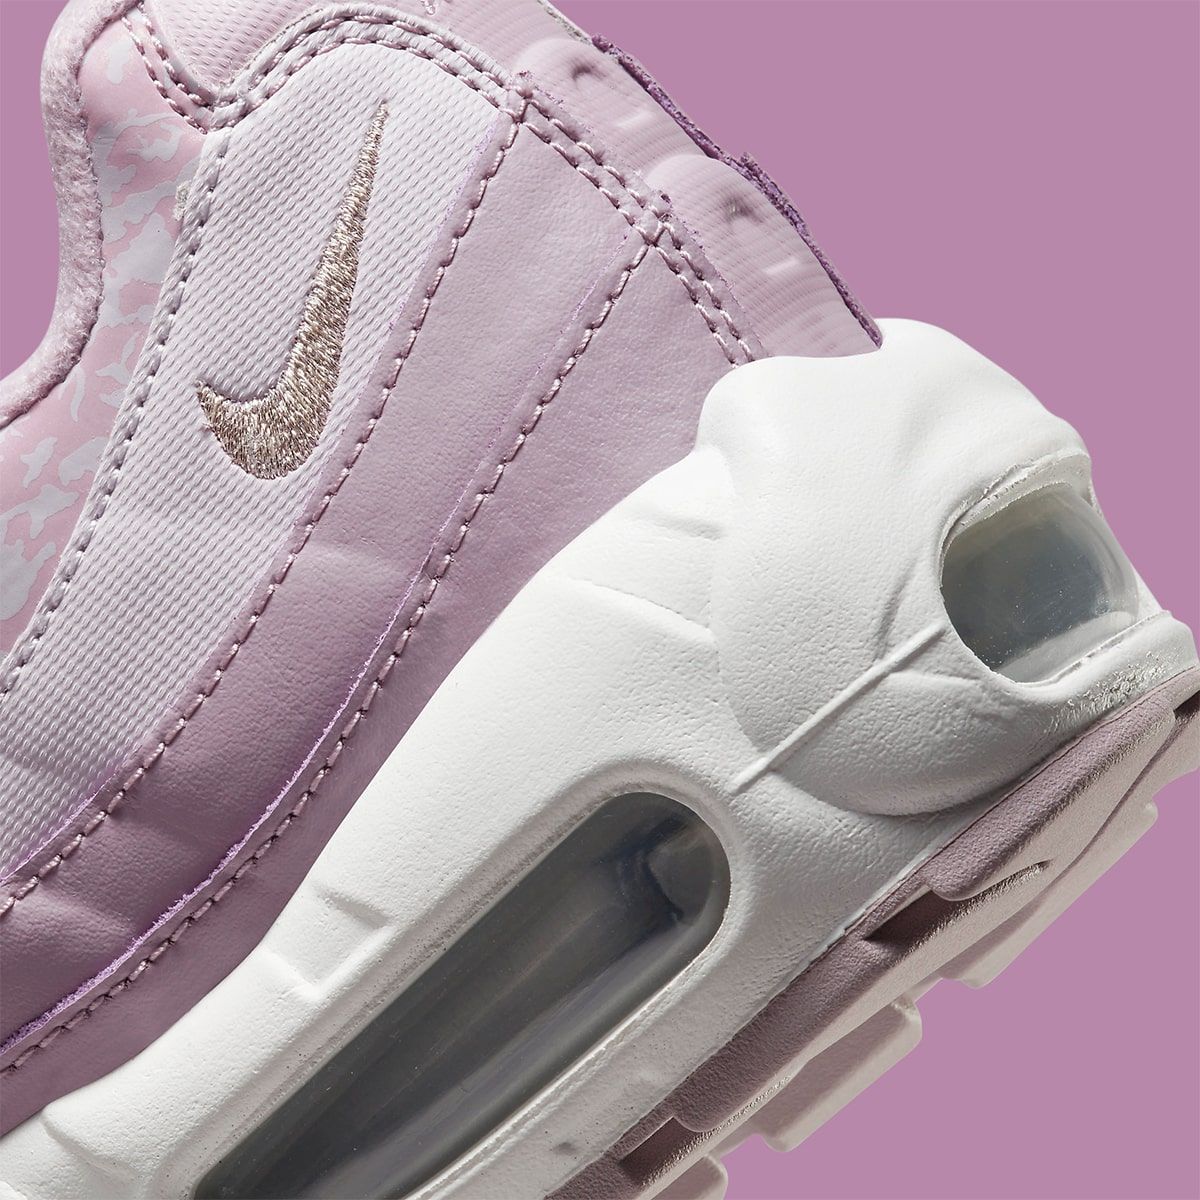 Pink Air Max 95 Appears with Reflective Camo Paneling | House of Heat°